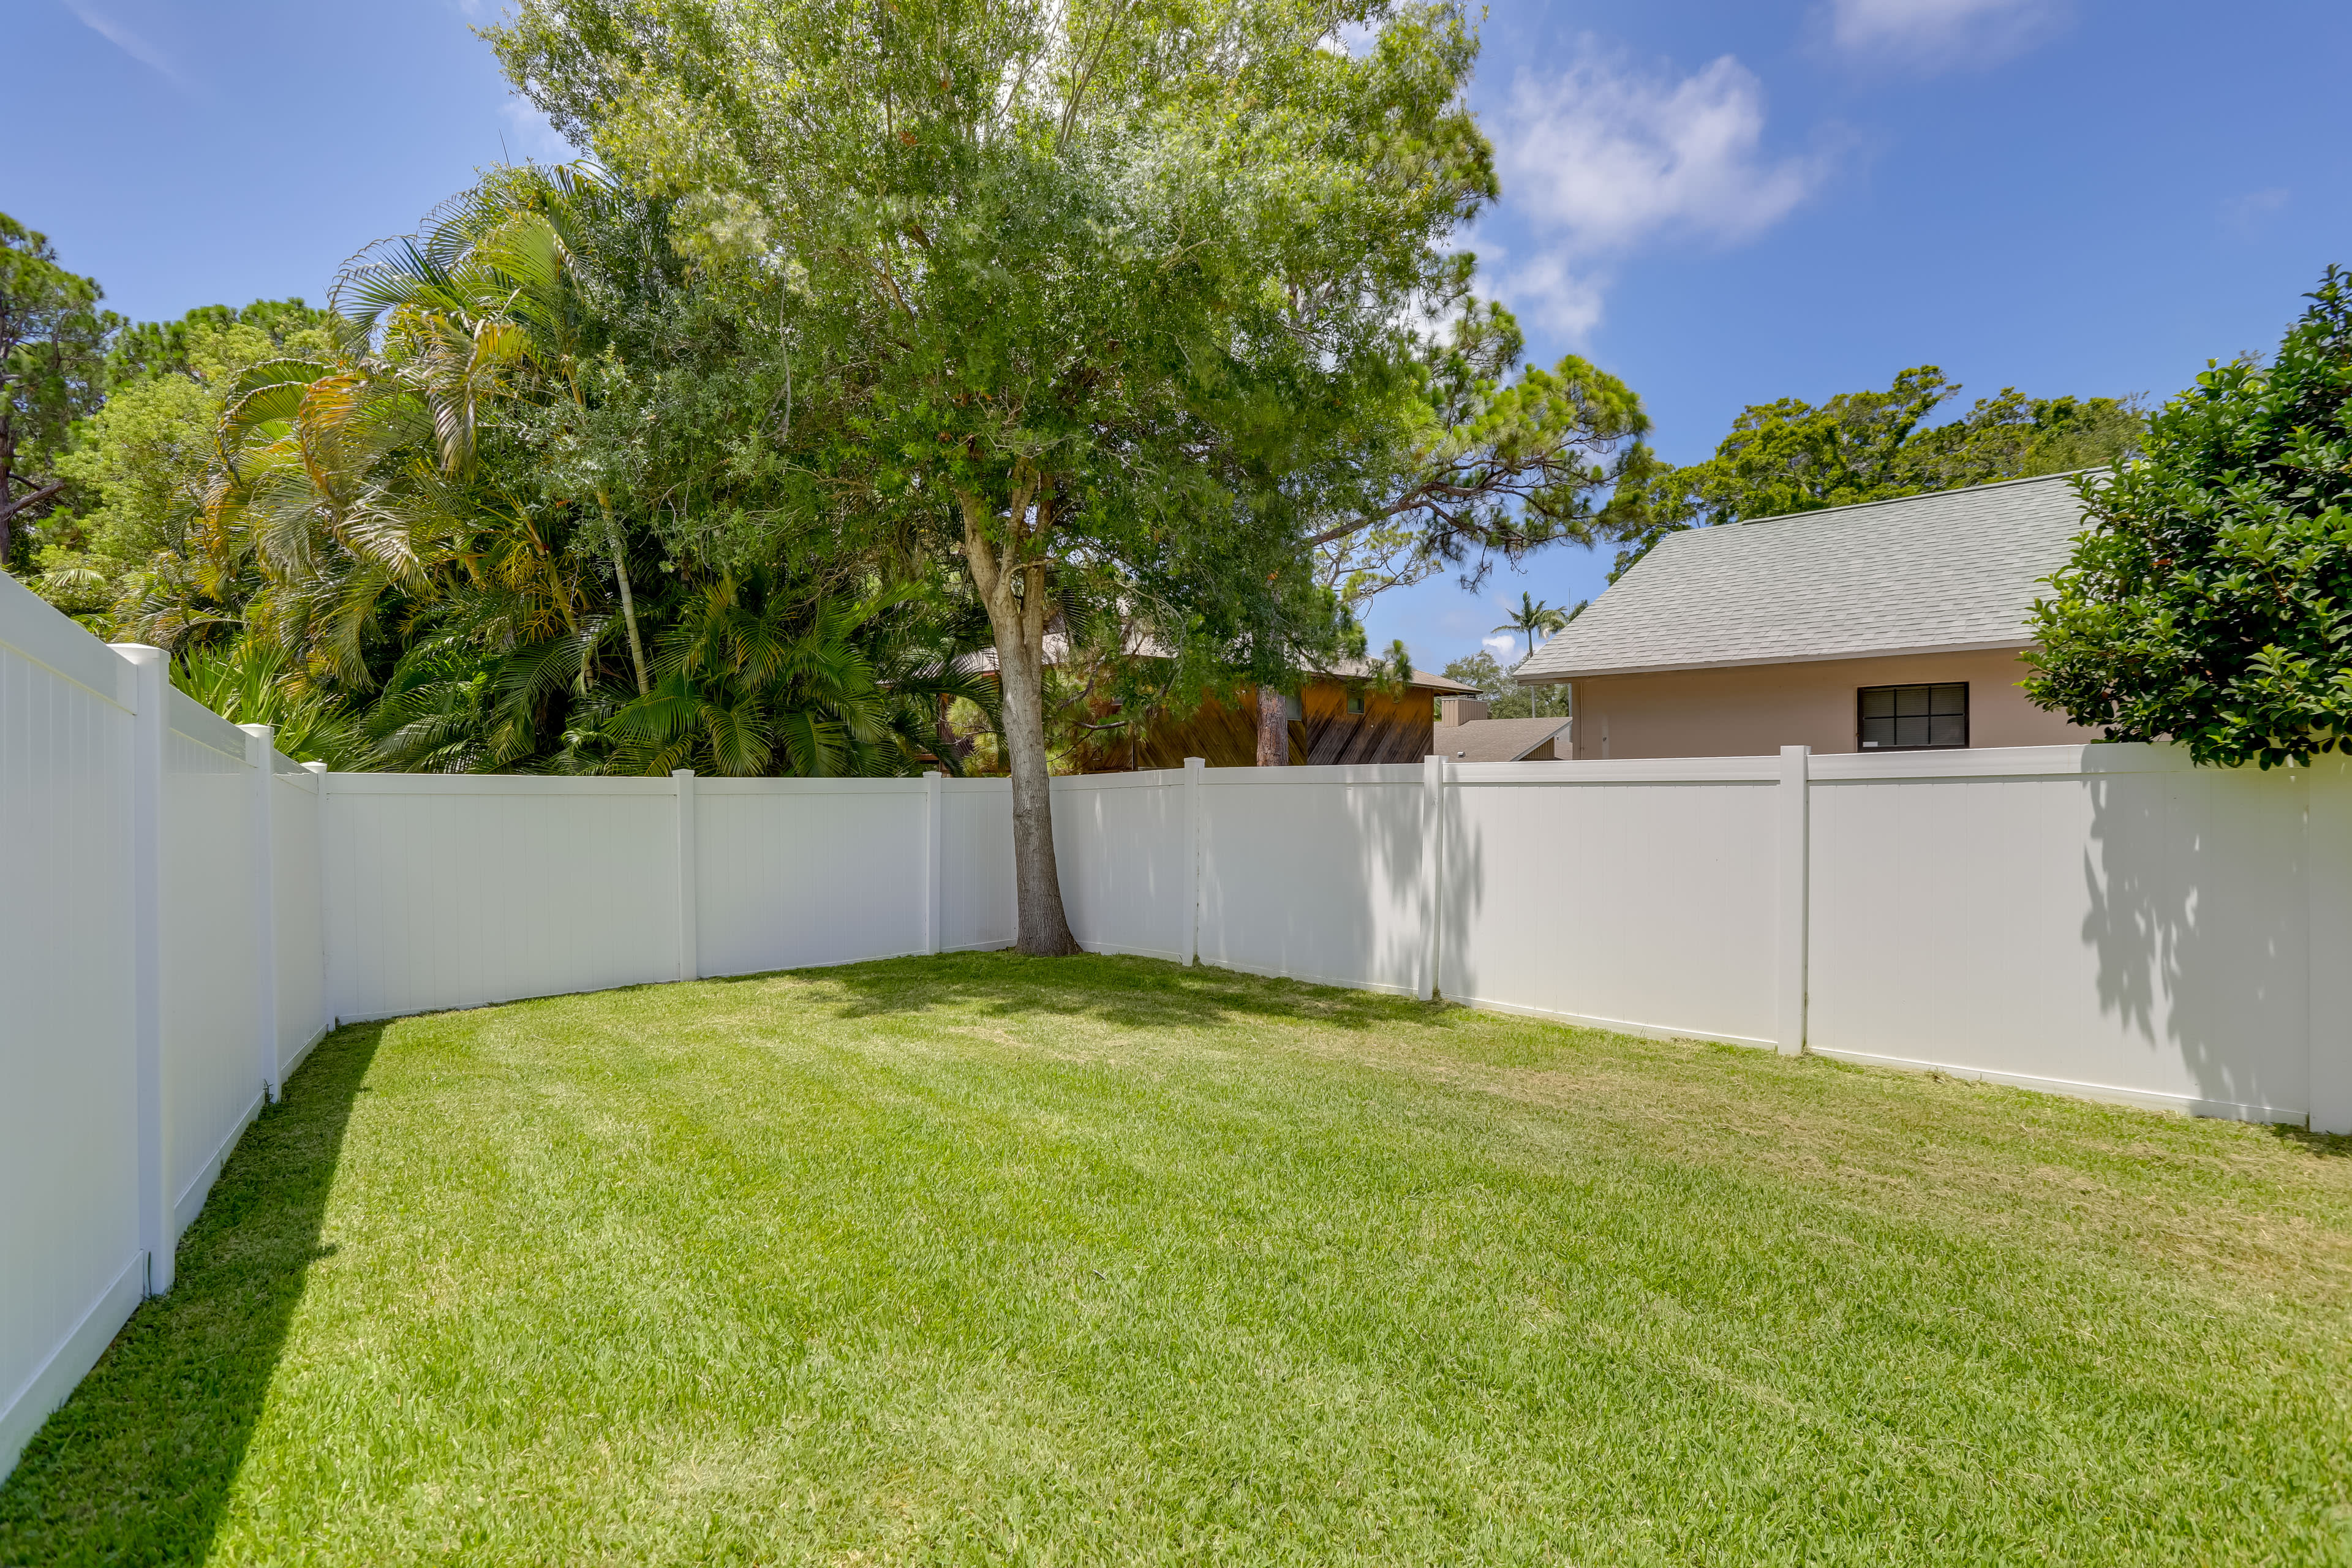 Shared Fenced Backyard | Additional Vacation Rental On-Site